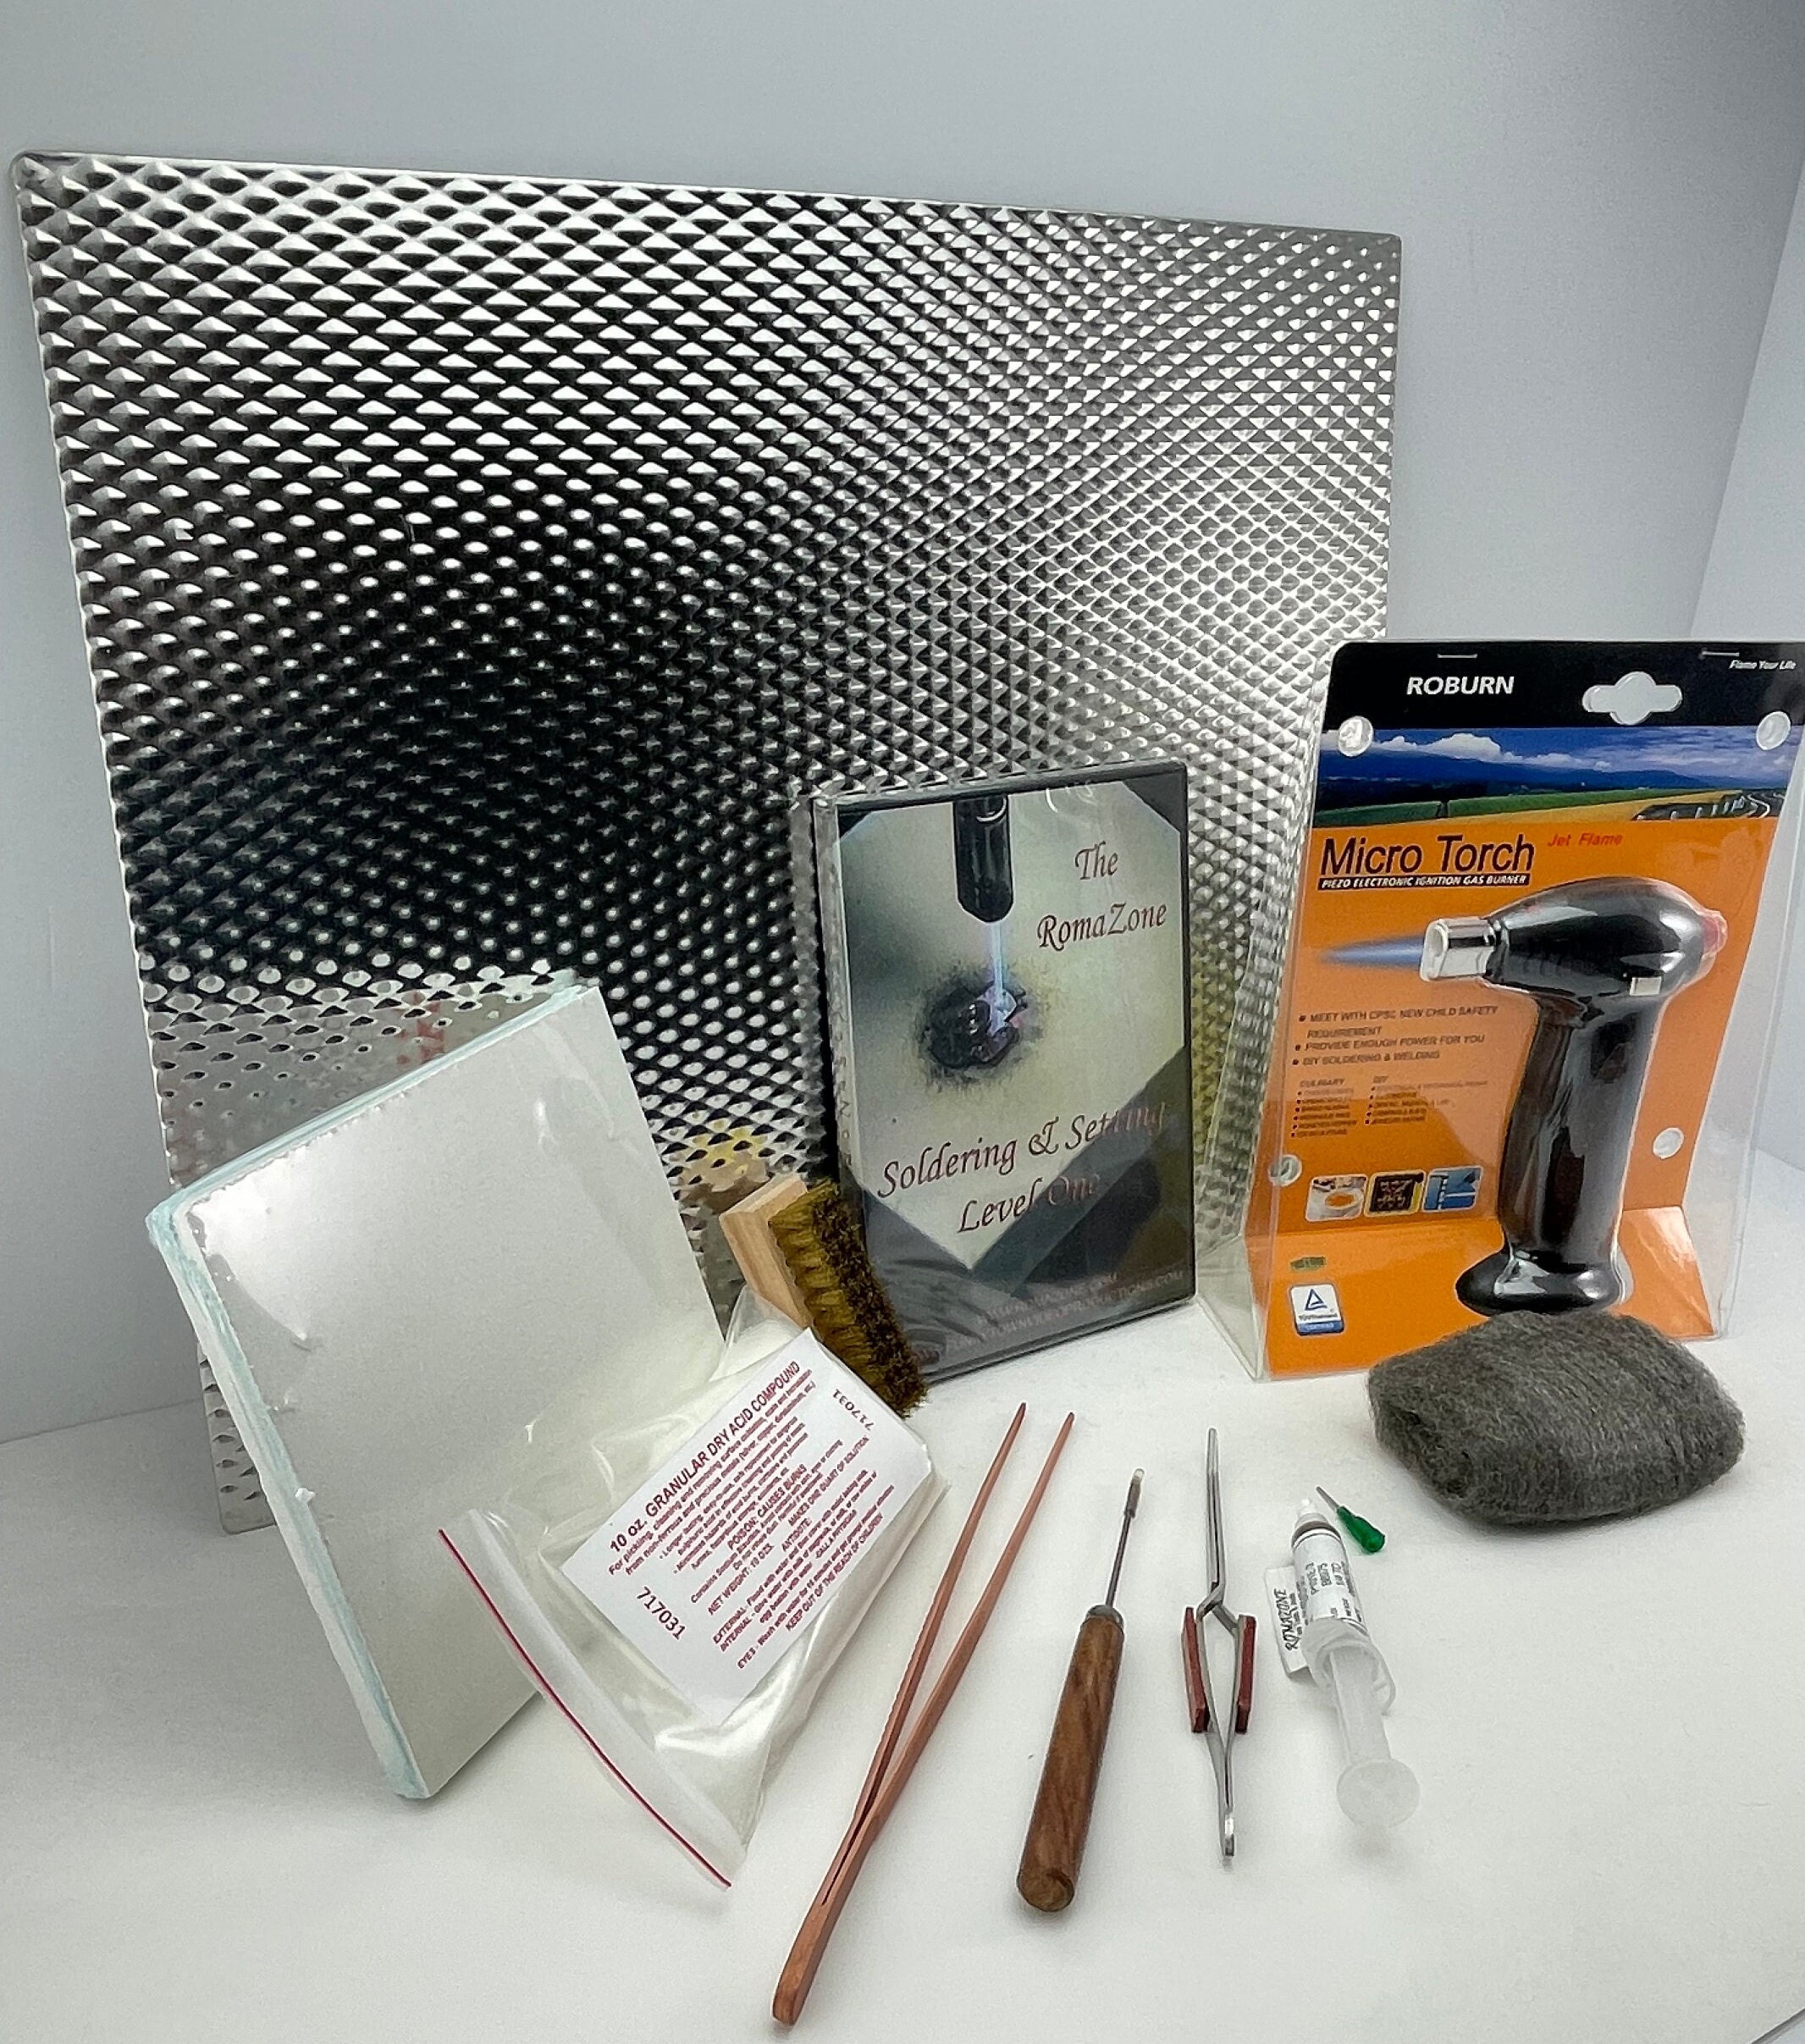 Standard Jewelry Soldering Kit with Silver Solder Wire